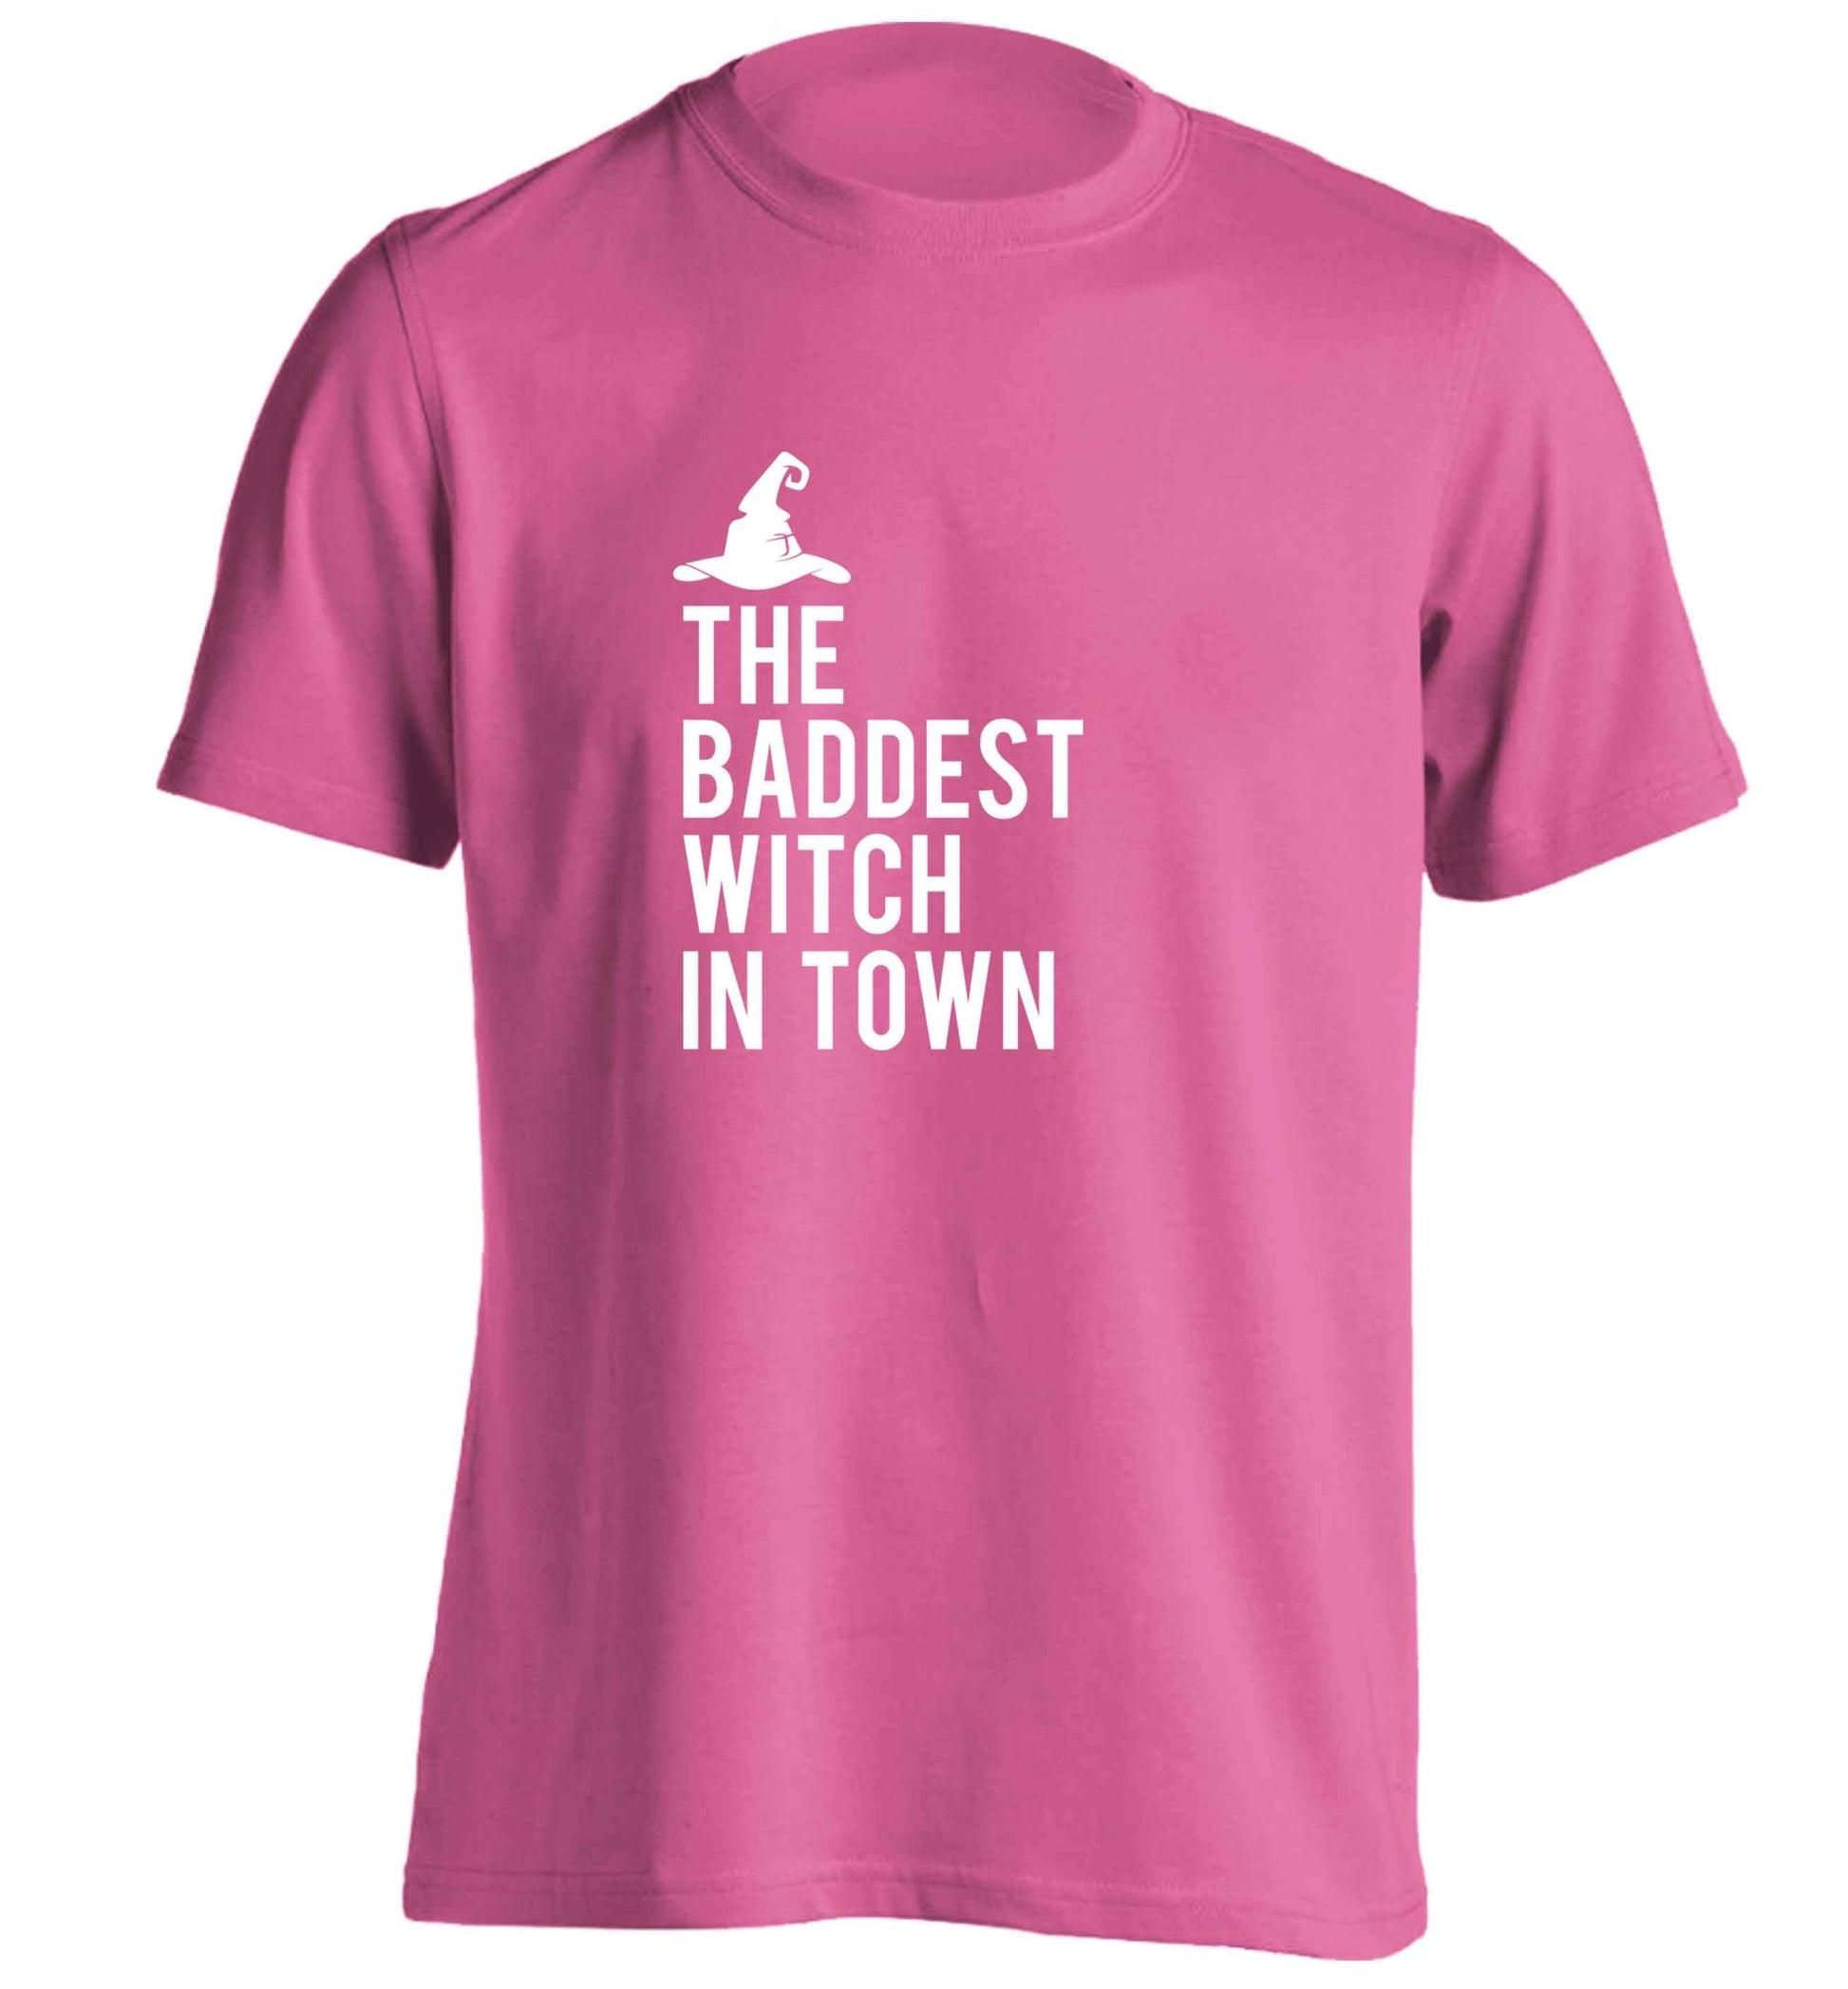 Badest witch in town adults unisex pink Tshirt 2XL